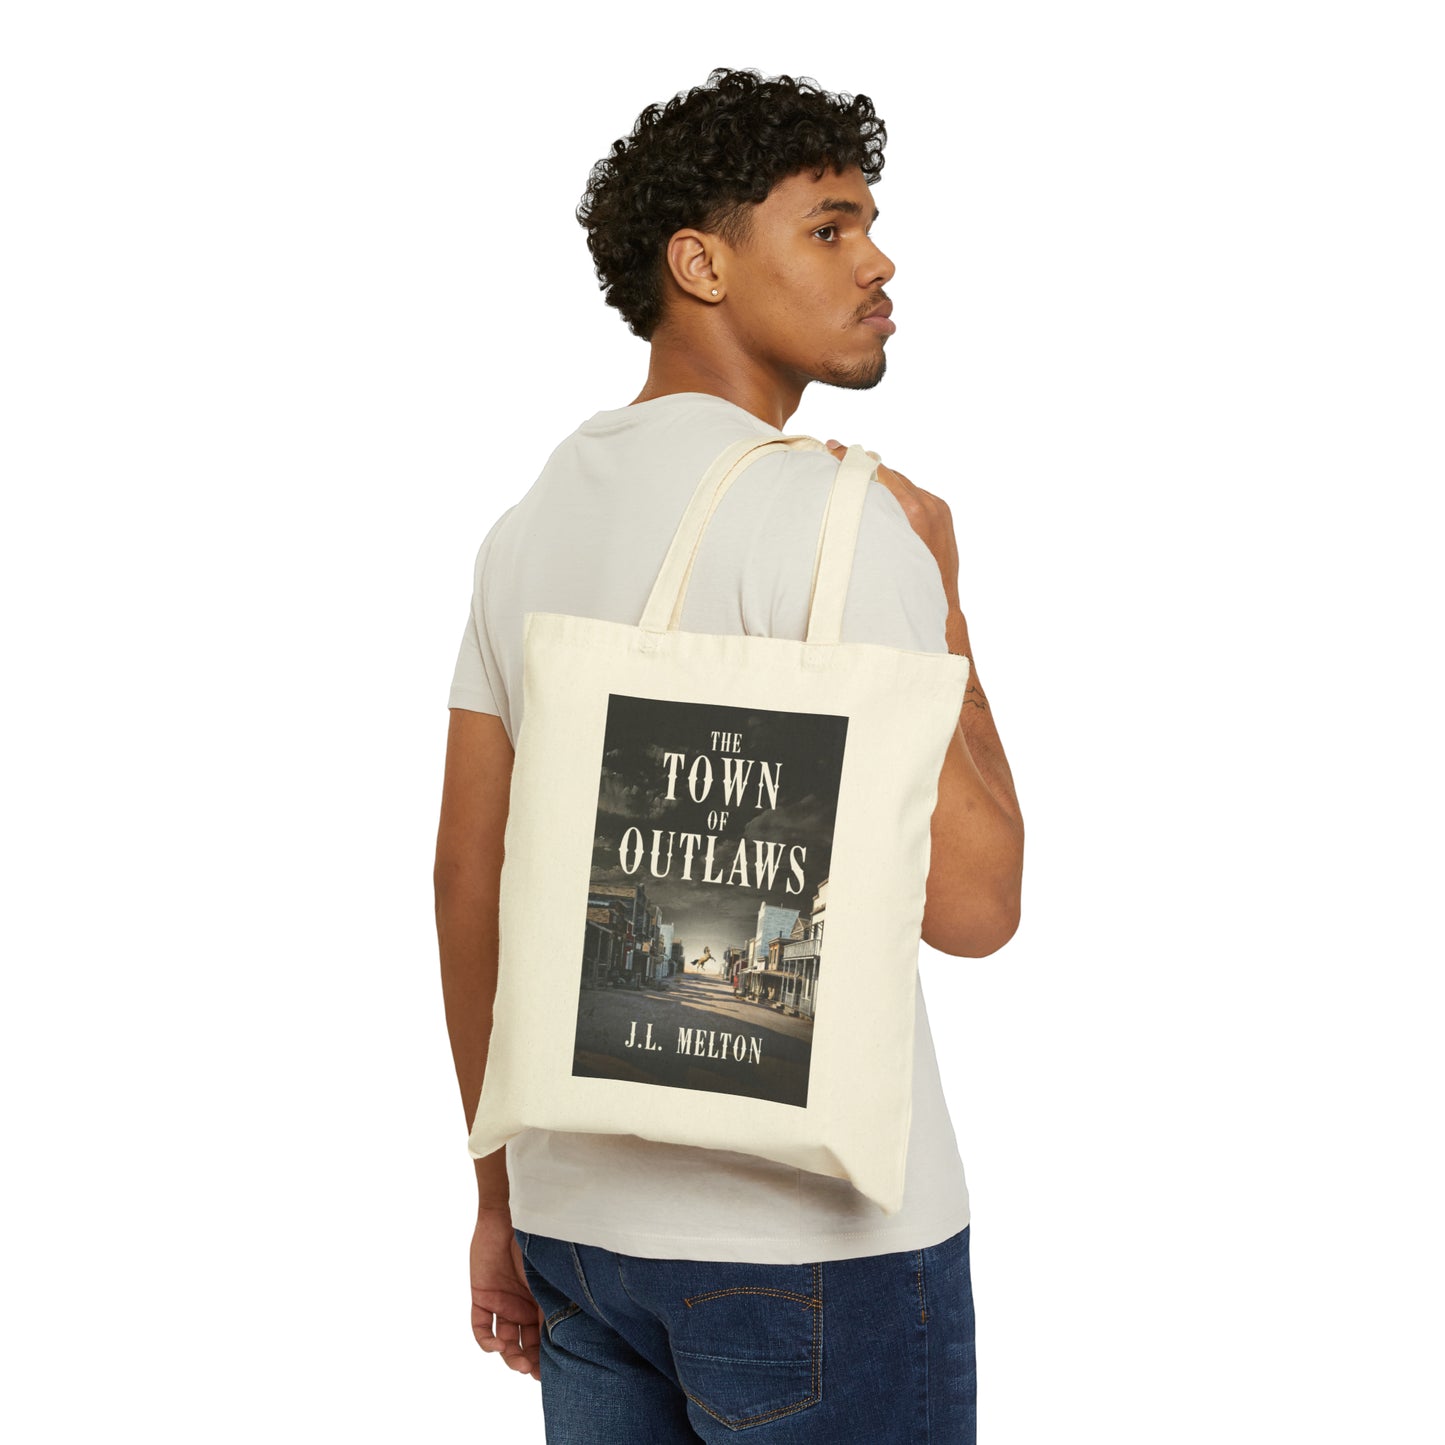 The Town Of Outlaws - Cotton Canvas Tote Bag